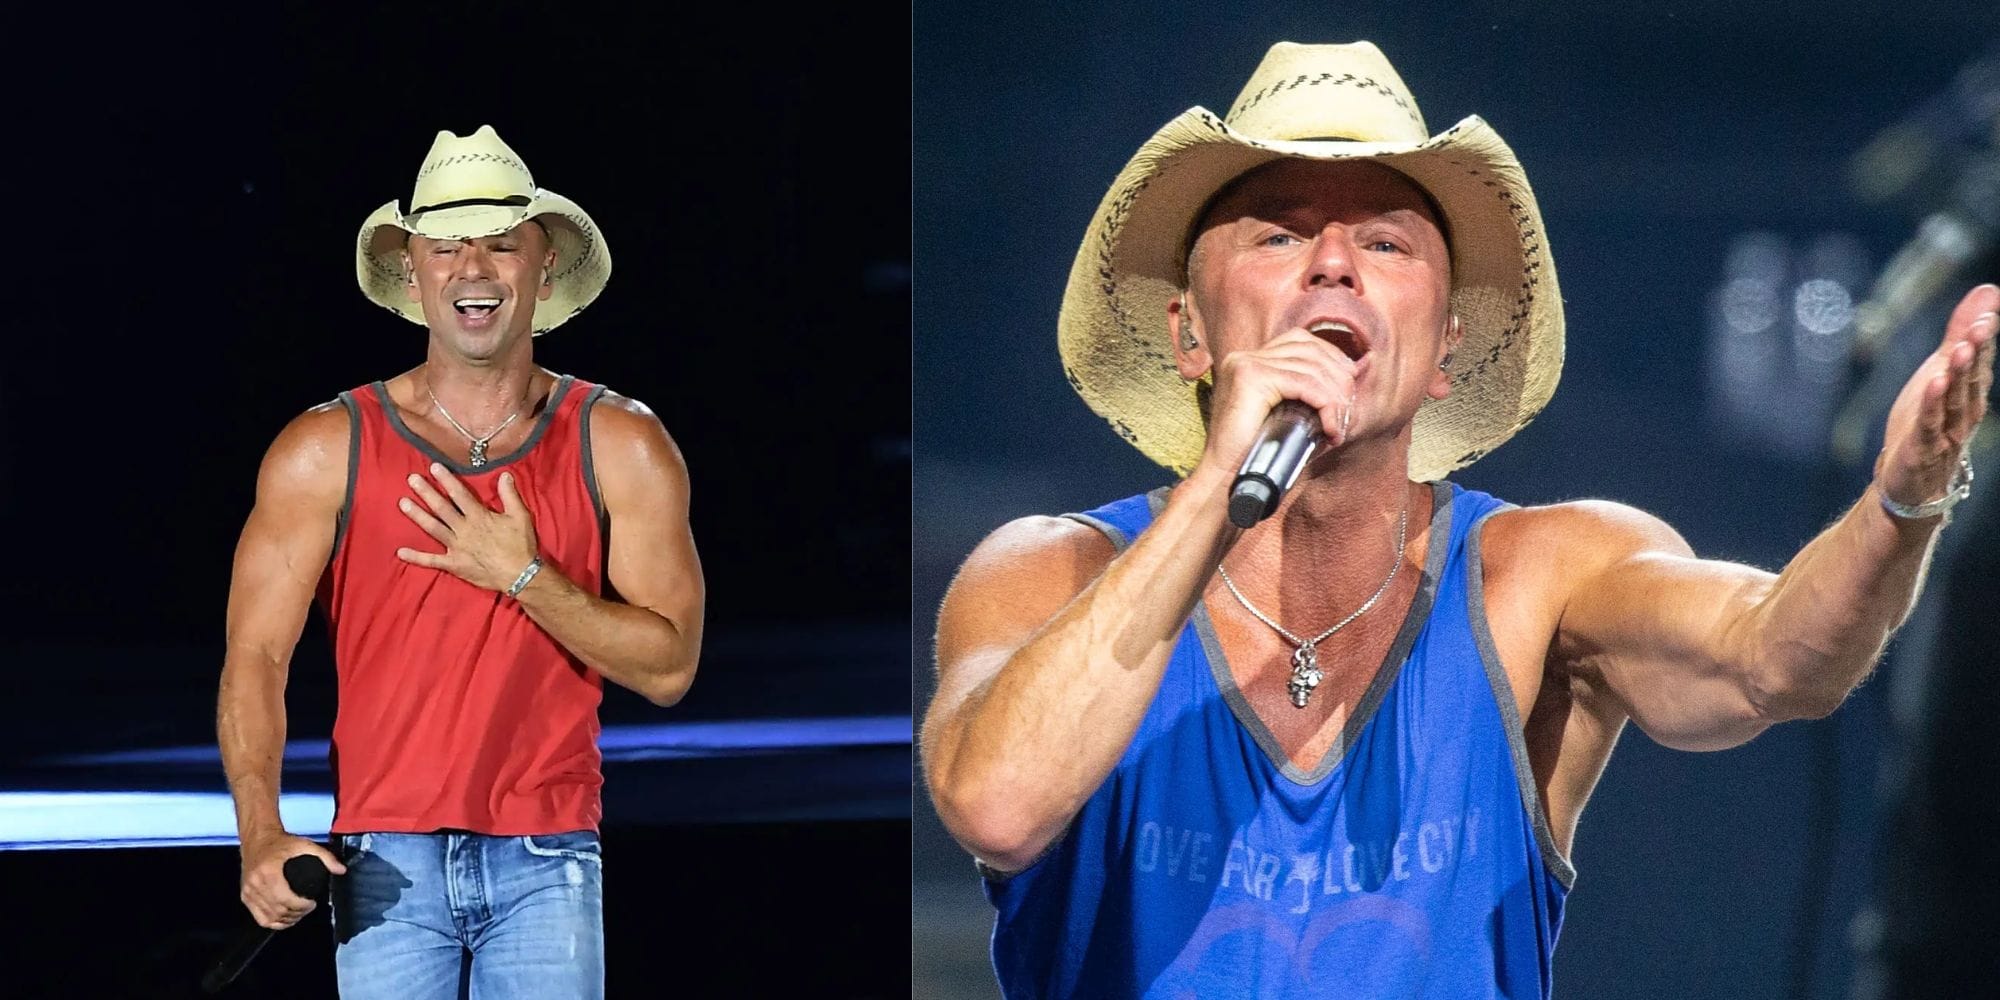 What Happened to Kenny Chesney?